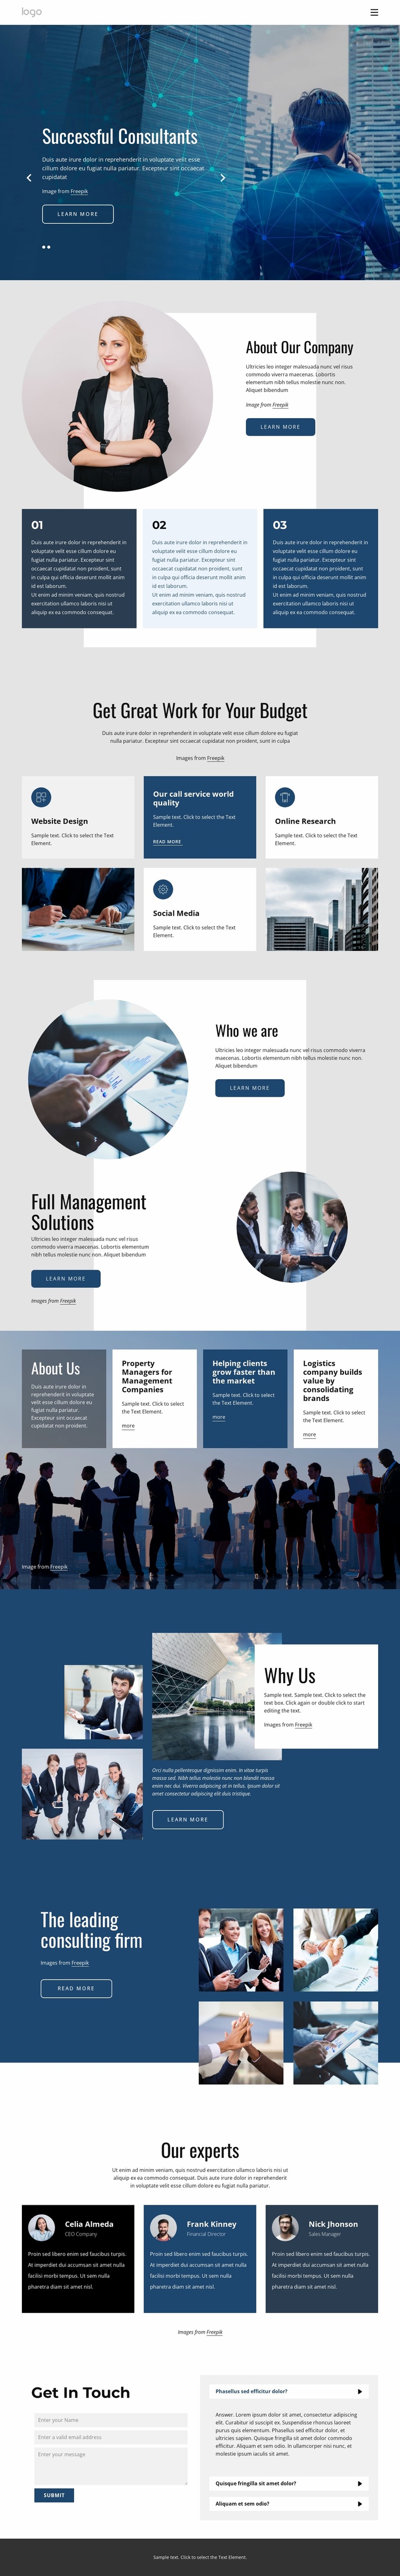 We offer tailored consulting services Landing Page